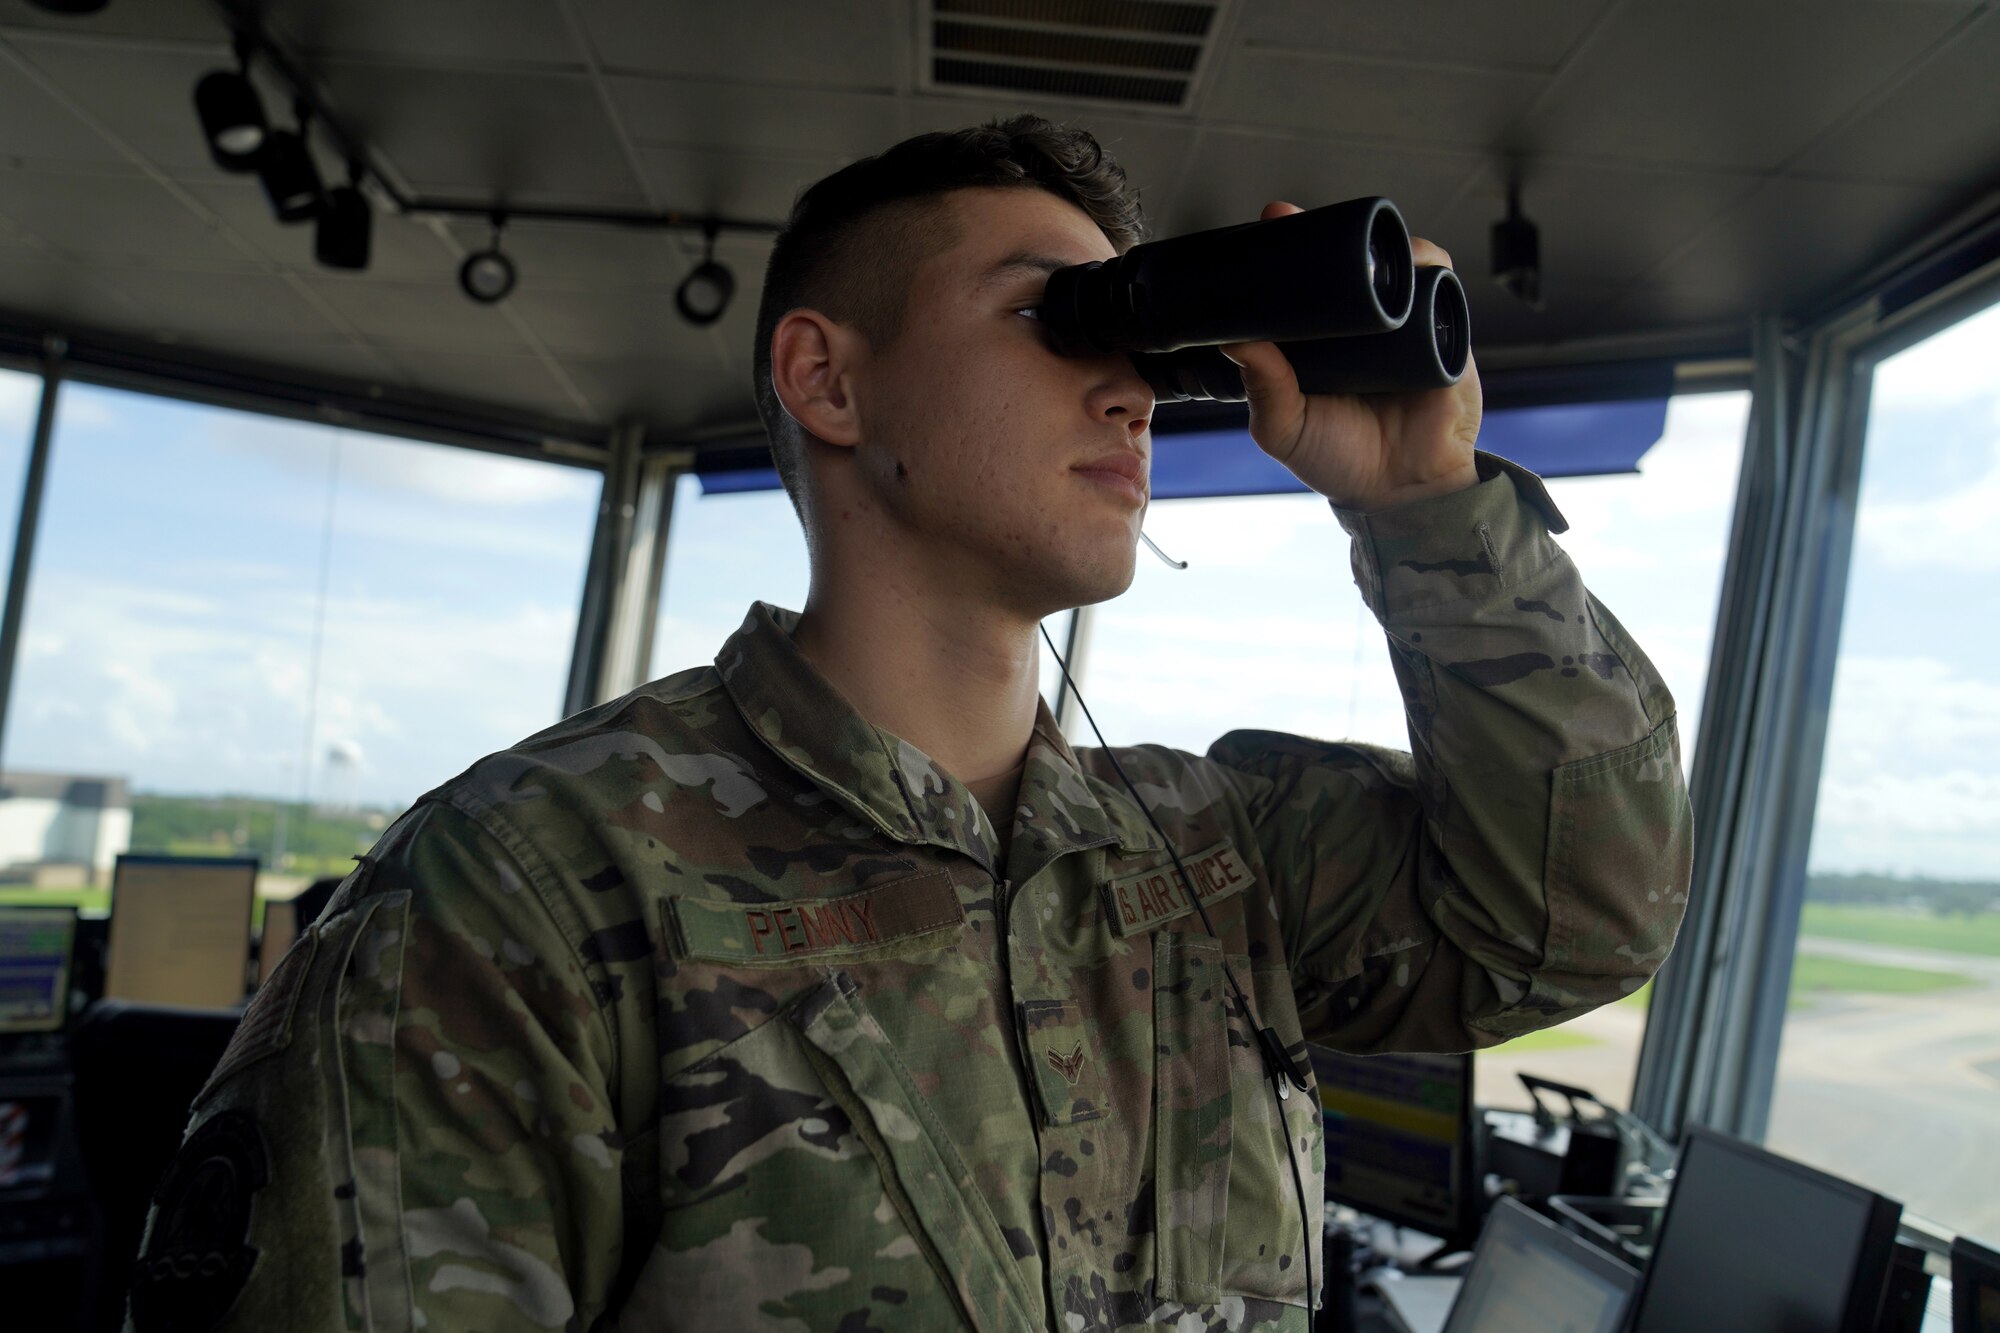 U.S. Air Force Airman 1st Class Jacob Penny, 81st Training Wing air traffic controller, poses for a photo with binoculars inside the Keesler Air Traffic Control tower at Keesler Air Force Base, Mississippi, June 25, 2021. The 81st TRW Operations Support Flight traffics the aircraft on the Keesler flightline and the local airspace. (U.S. Air Force photo by Senior Airman Seth Haddix)